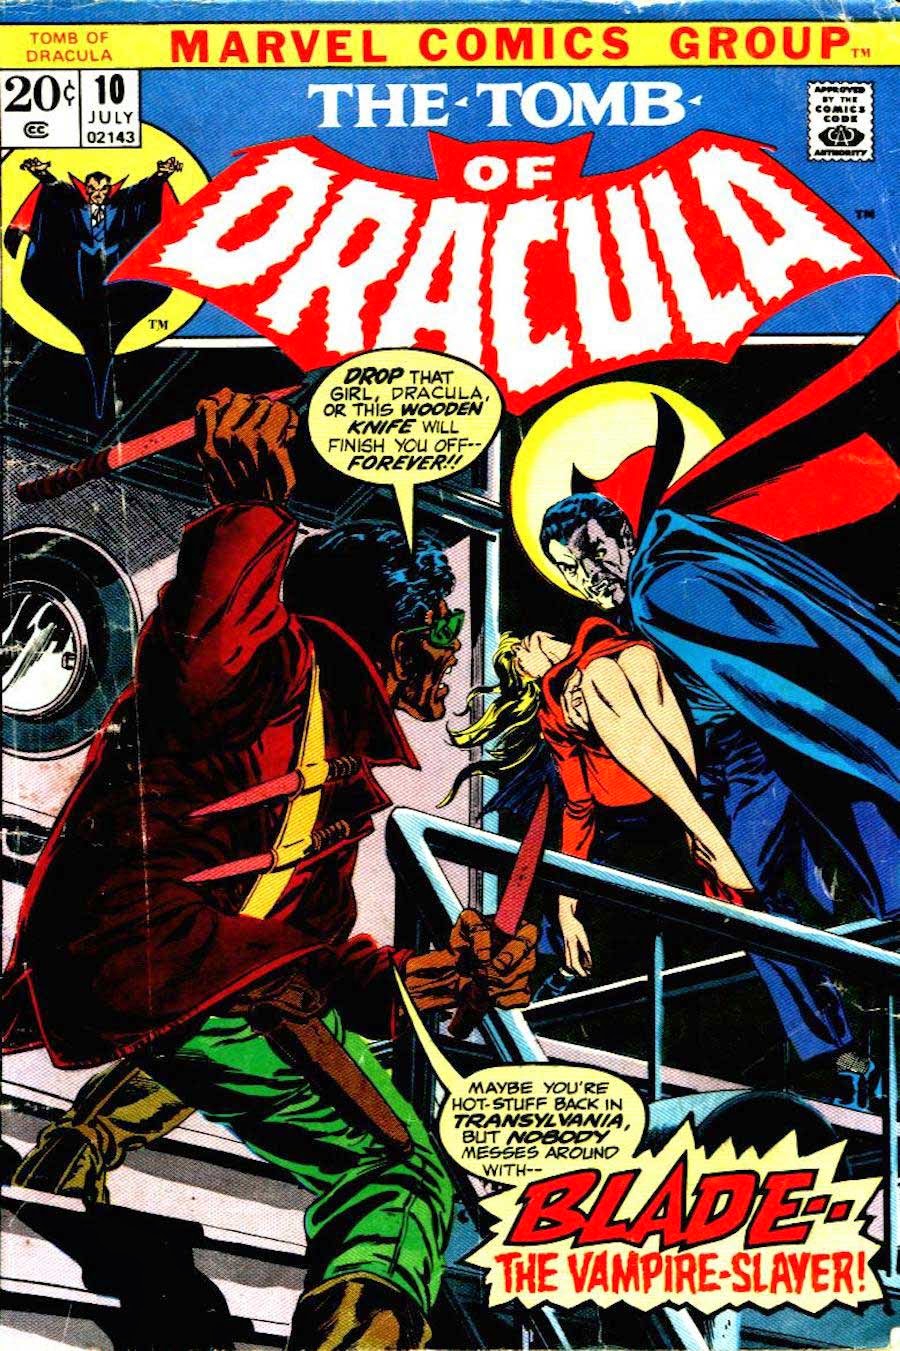 Tomb of Dracula #10 marvel key issue 1970s bronze age comic book cover - 1st appearance Blade